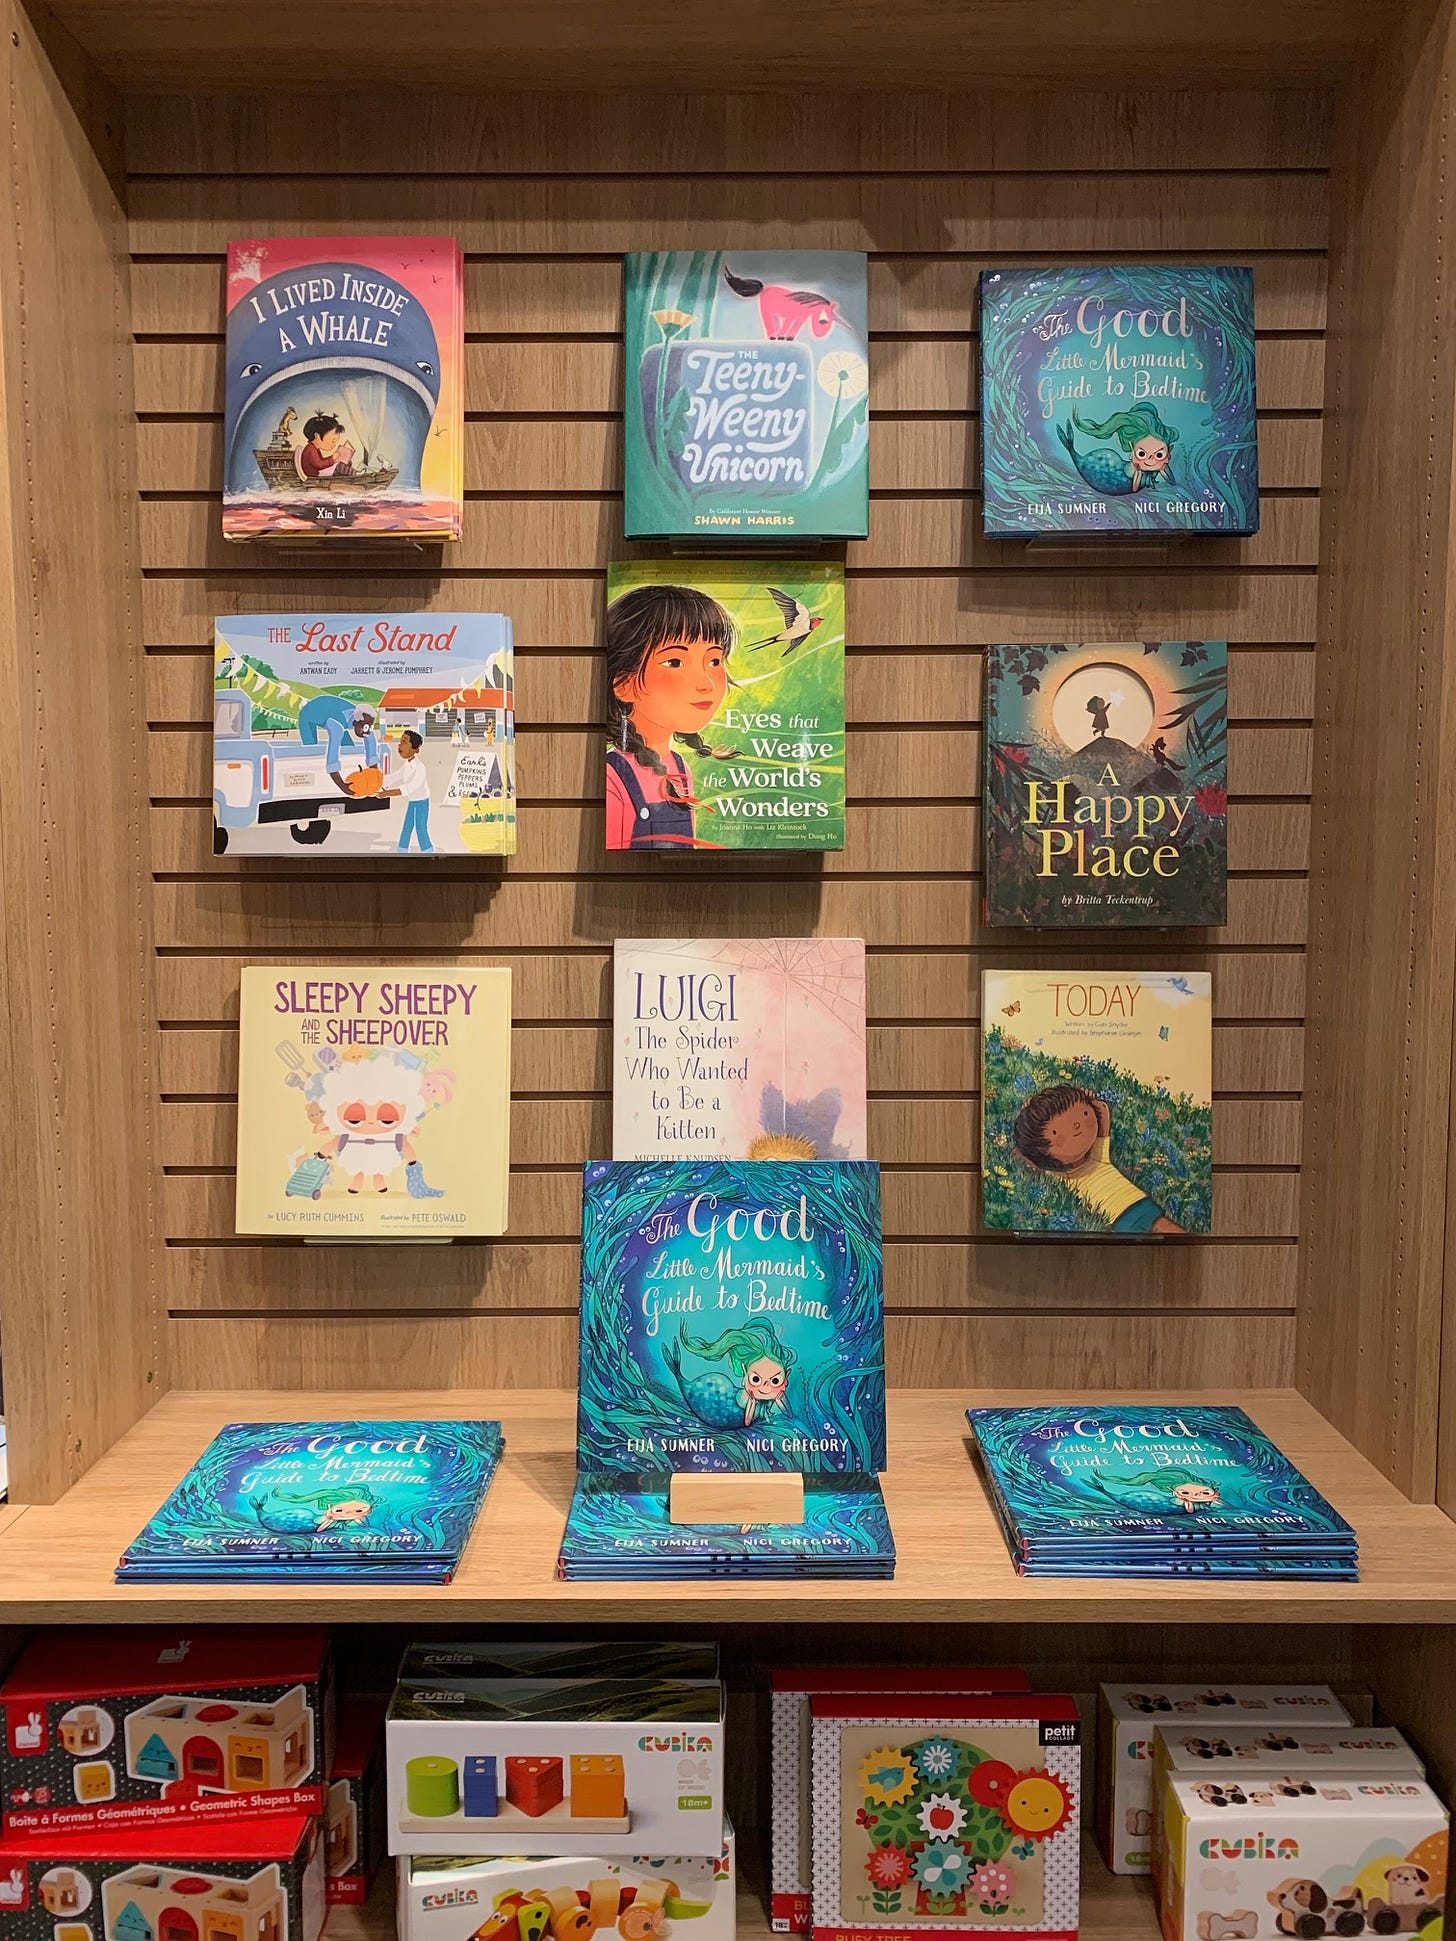 A bookshelf with picture books on display and Eija's book The Good Little Mermaid's Guide to Bedtime prominently featured.